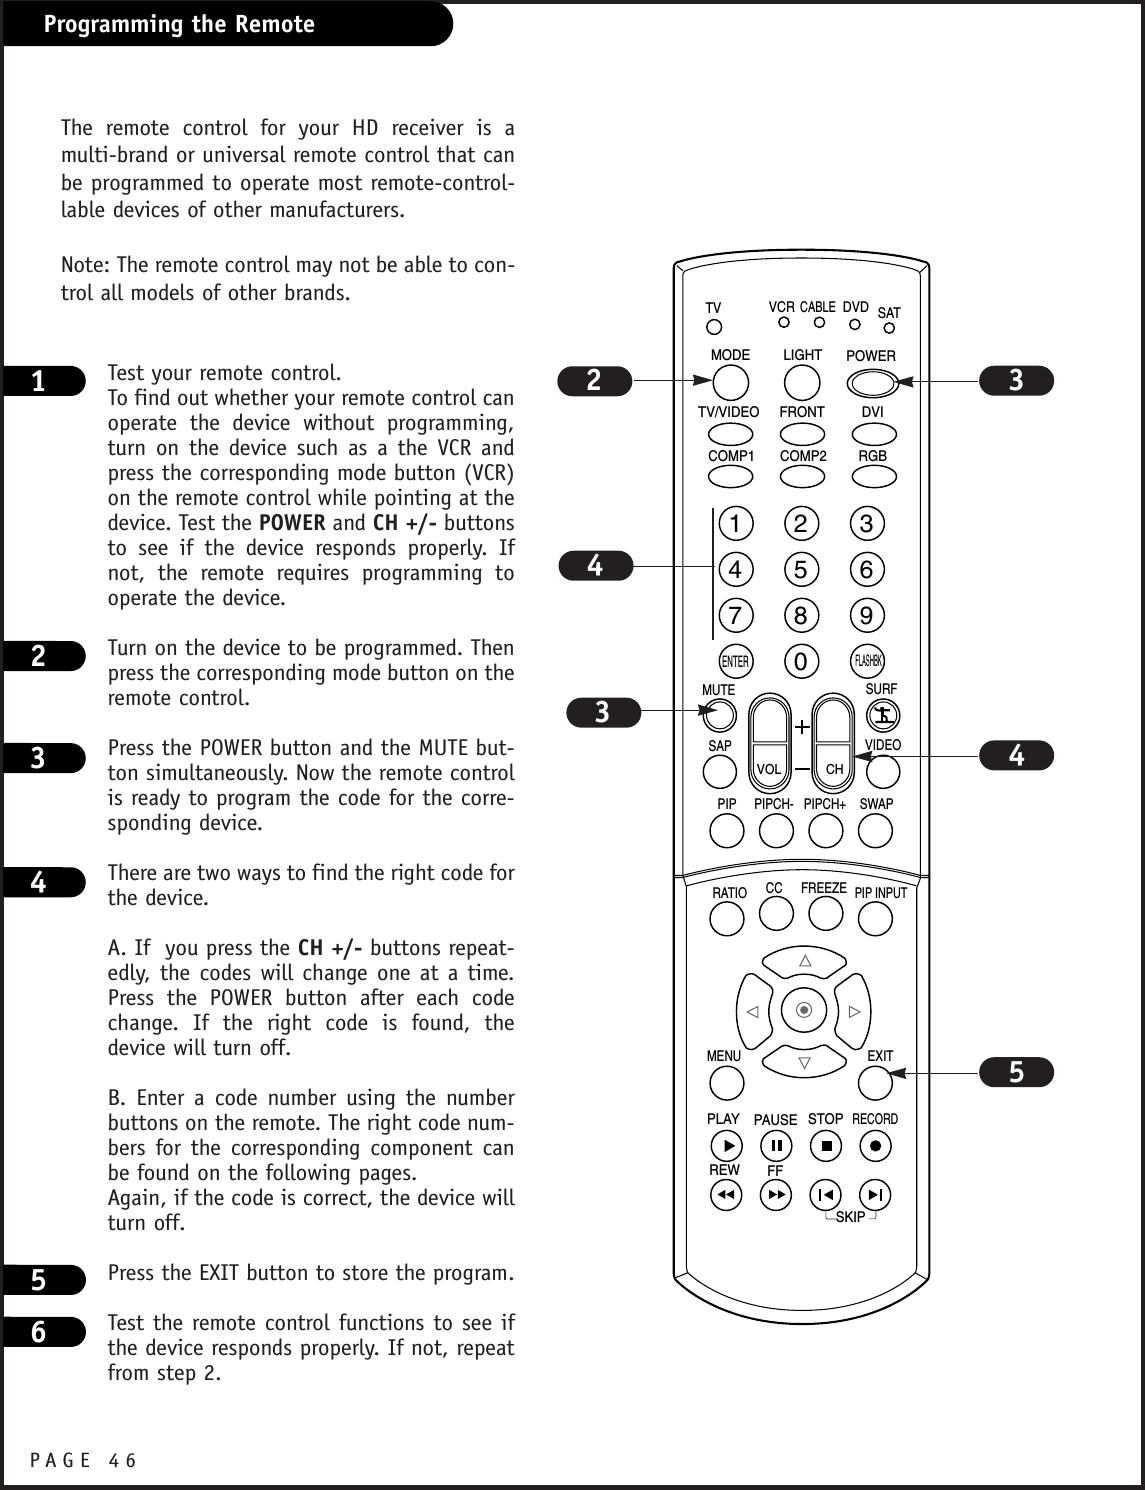 PAGE 46Programming the RemoteTest your remote control.To find out whether your remote control canoperate the device without programming,turn on the device such as a the VCR andpress the corresponding mode button (VCR)on the remote control while pointing at thedevice. Test the POWER and CH +/- buttonsto see if the device responds properly. Ifnot, the remote requires programming tooperate the device.Turn on the device to be programmed. Thenpress the corresponding mode button on theremote control.Press the POWER button and the MUTE but-ton simultaneously. Now the remote controlis ready to program the code for the corre-sponding device.There are two ways to find the right code forthe device.A. If  you press the CH +/- buttons repeat-edly, the codes will change one at a time.Press the POWER button after each codechange. If the right code is found, thedevice will turn off.B. Enter a code number using the numberbuttons on the remote. The right code num-bers for the corresponding component canbe found on the following pages.Again, if the code is correct, the device willturn off.Press the EXIT button to store the program.Test the remote control functions to see ifthe device responds properly. If not, repeatfrom step 2.11234567890TVMODE LIGHT POWER   TV/VIDEO DVIRGBVCRCABLEDVD SATMUTESWAPPIPCH- PIPCH+PIPRATIORECORDSTOPPAUSEREWPLAYFFMENU EXITCC FREEZEPIP INPUTVOL CHSURFSAP VIDEOCOMP2COMP1FRONTSKIPENTERFLASHBK2 3453234564The remote control for your HD receiver is amulti-brand or universal remote control that canbe programmed to operate most remote-control-lable devices of other manufacturers.Note: The remote control may not be able to con-trol all models of other brands.